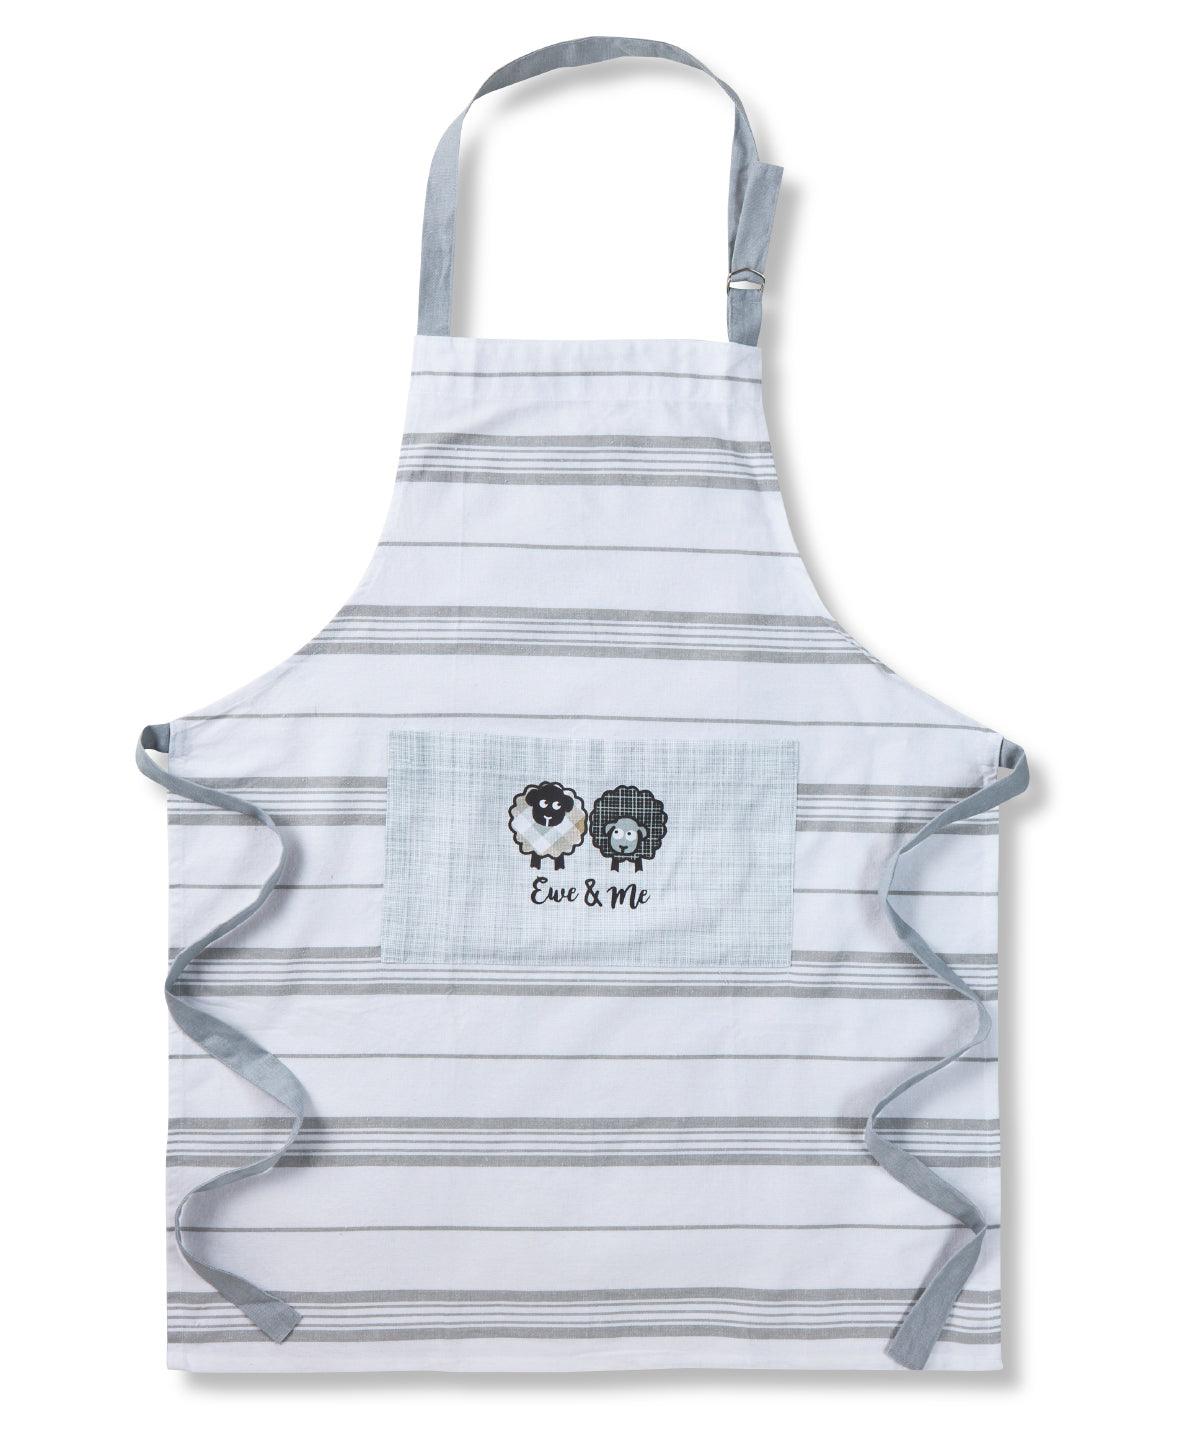 White/Grey - Ewe & Me apron Aprons Home & Living Aprons & Service, New in, Selected Aprons Schoolwear Centres